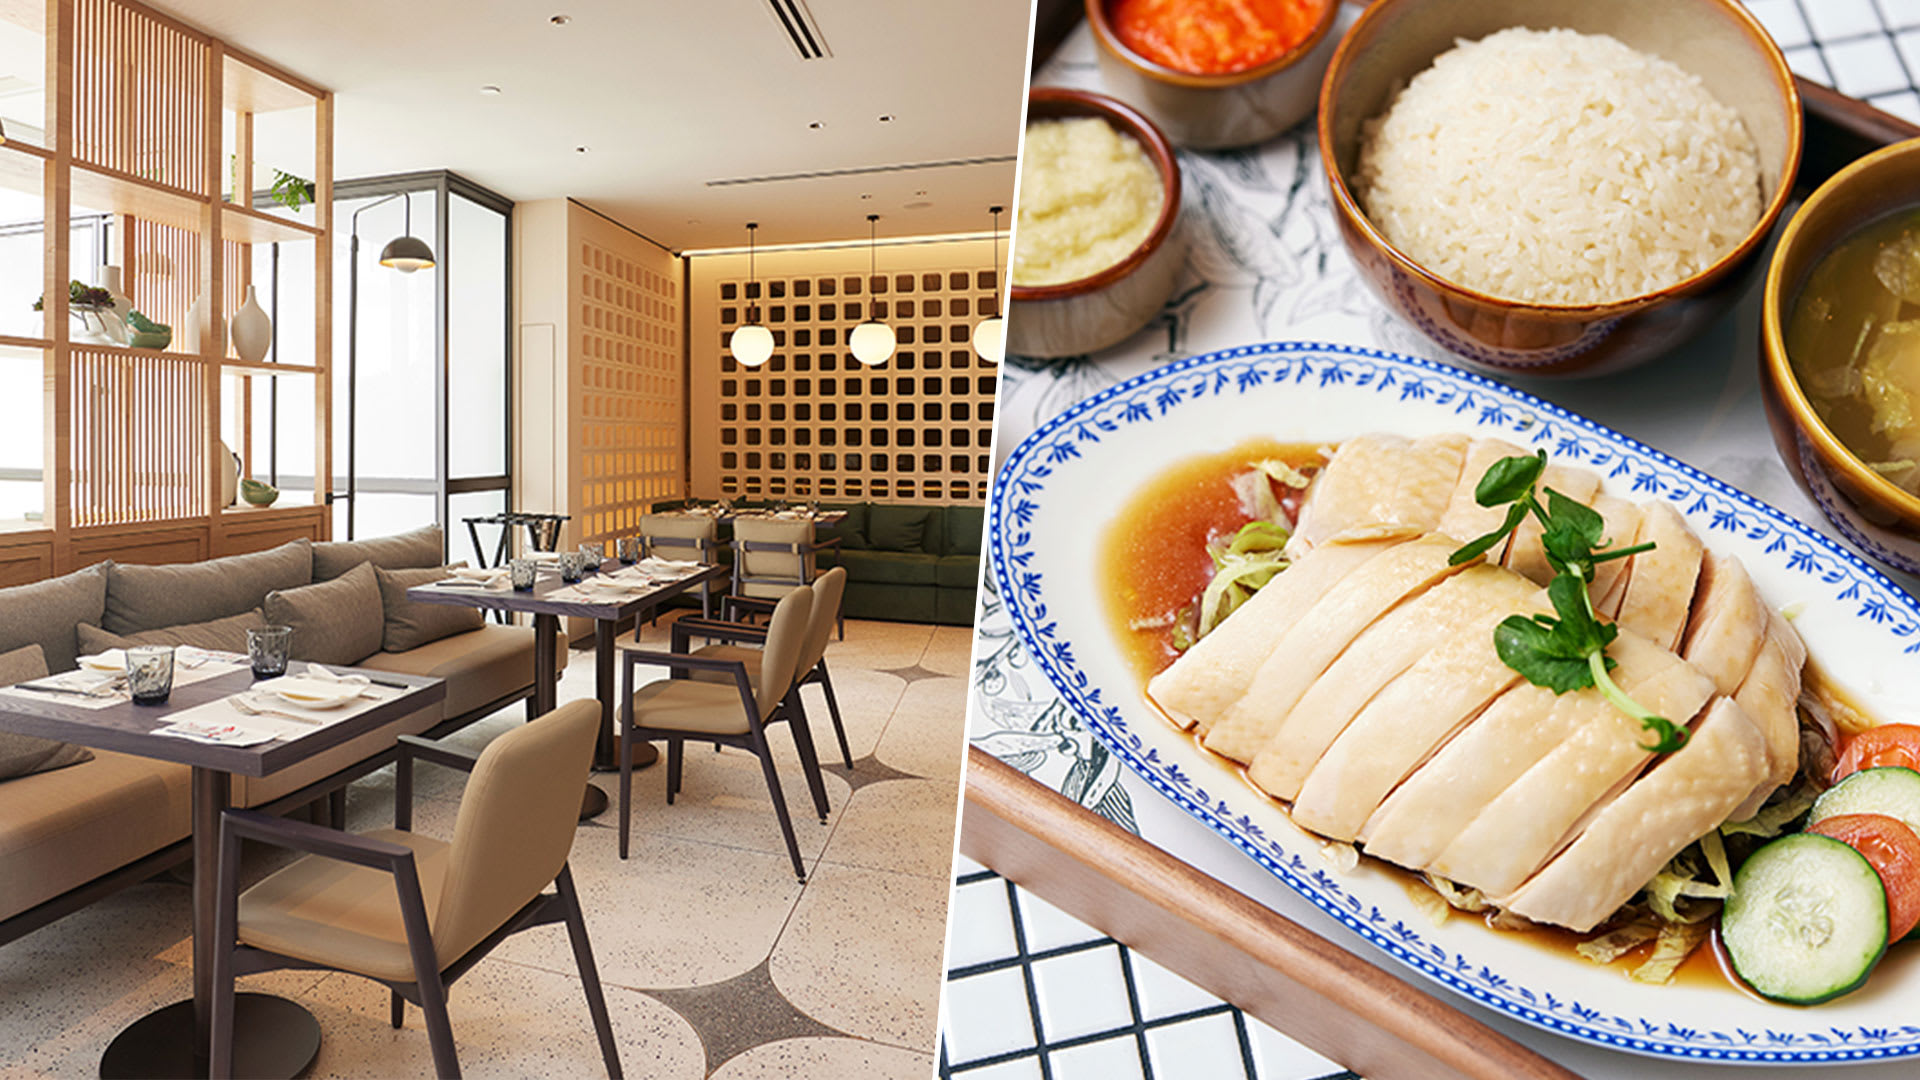 Chatterbox Lowers Its Famed ‘Atas’ Chicken Rice Price After Nearly $4mil Revamp